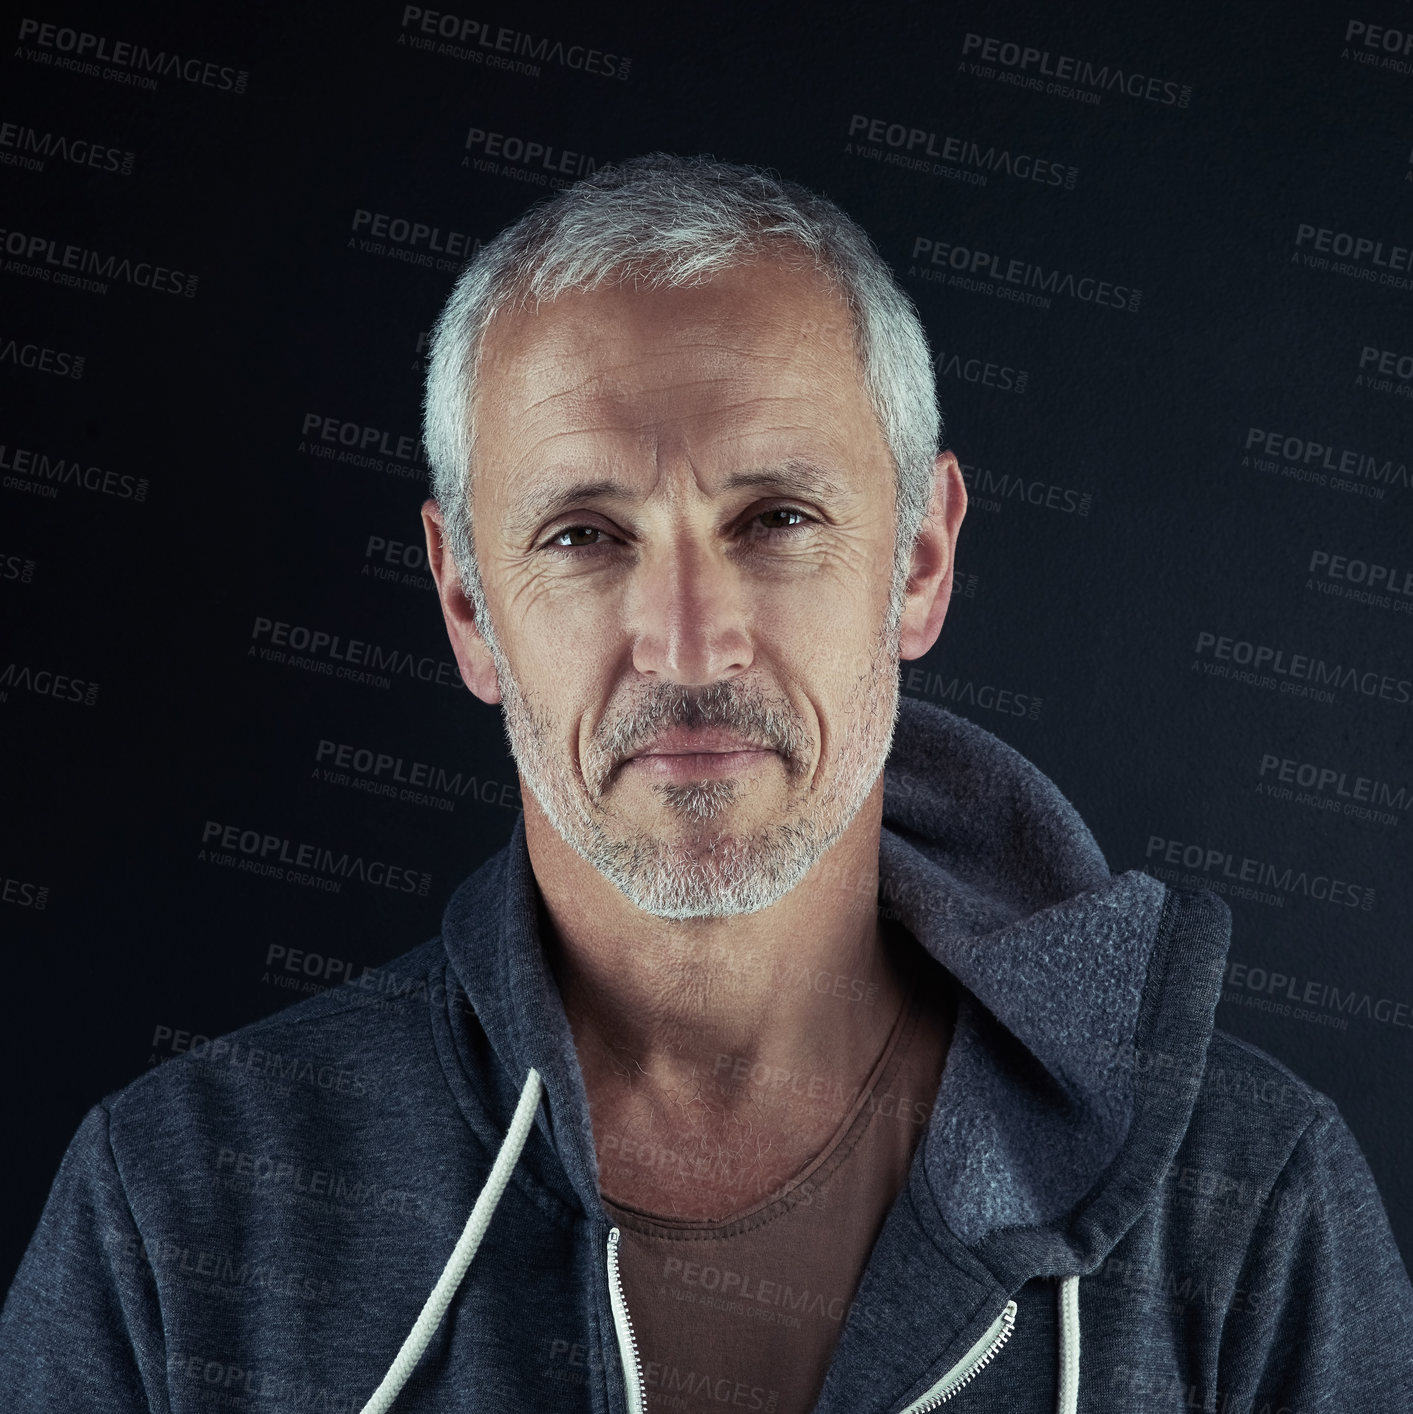 Buy stock photo Portrait of a man posing against a dark background